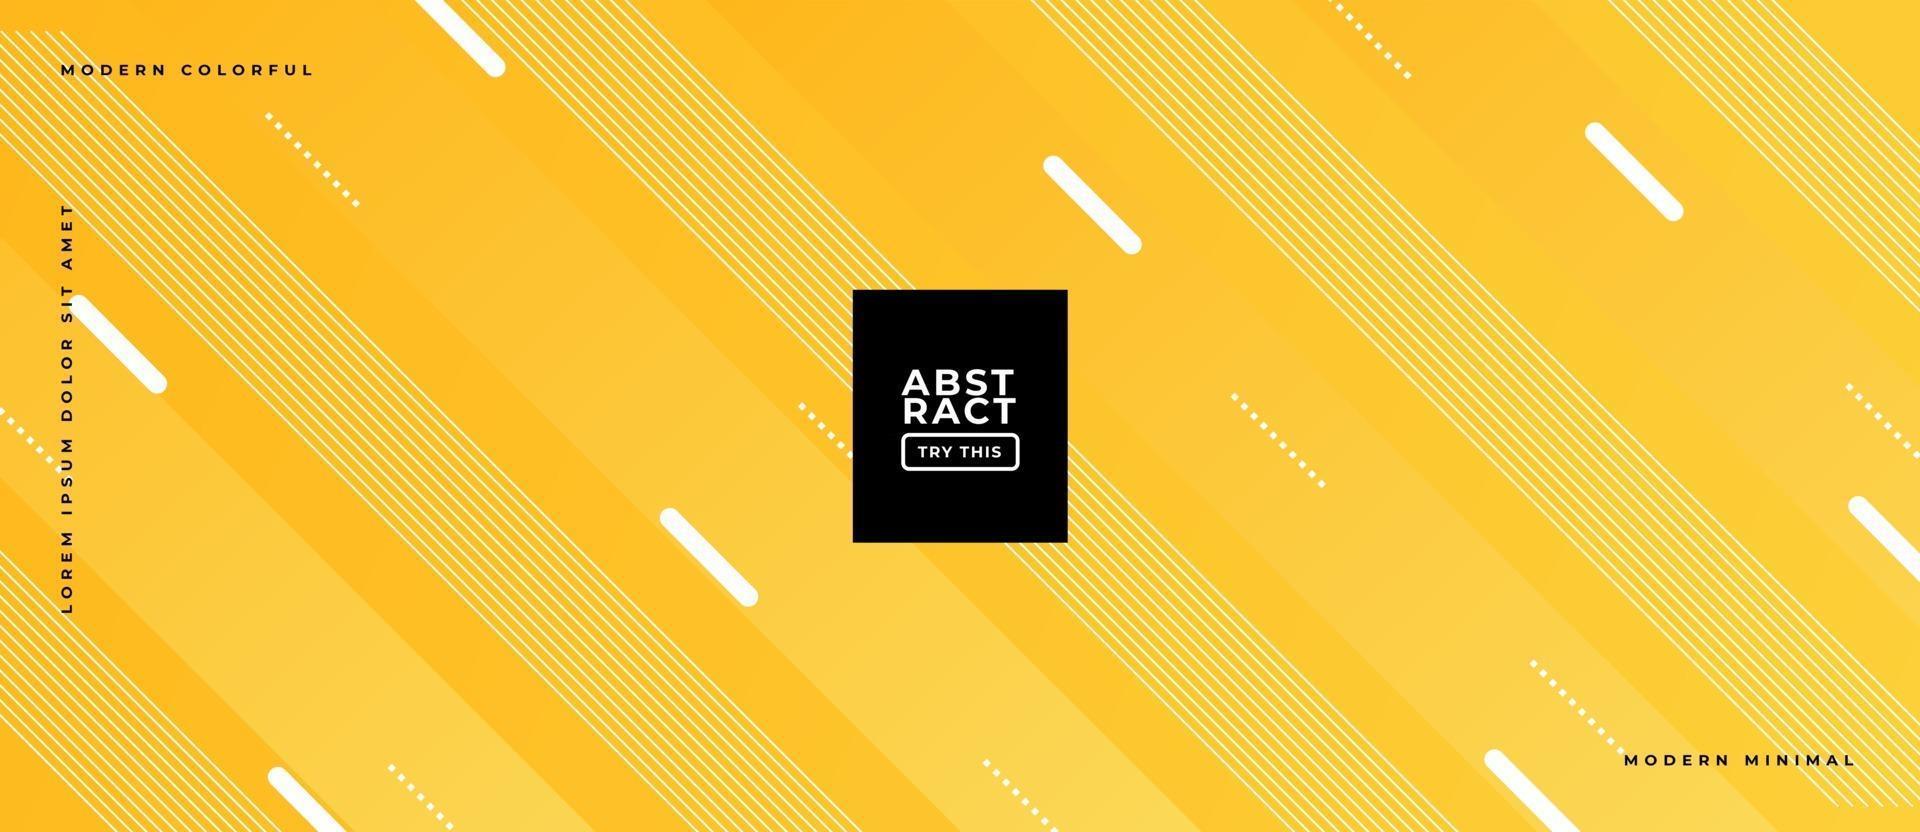 Geometric Line Shapes in Yellow Background. vector